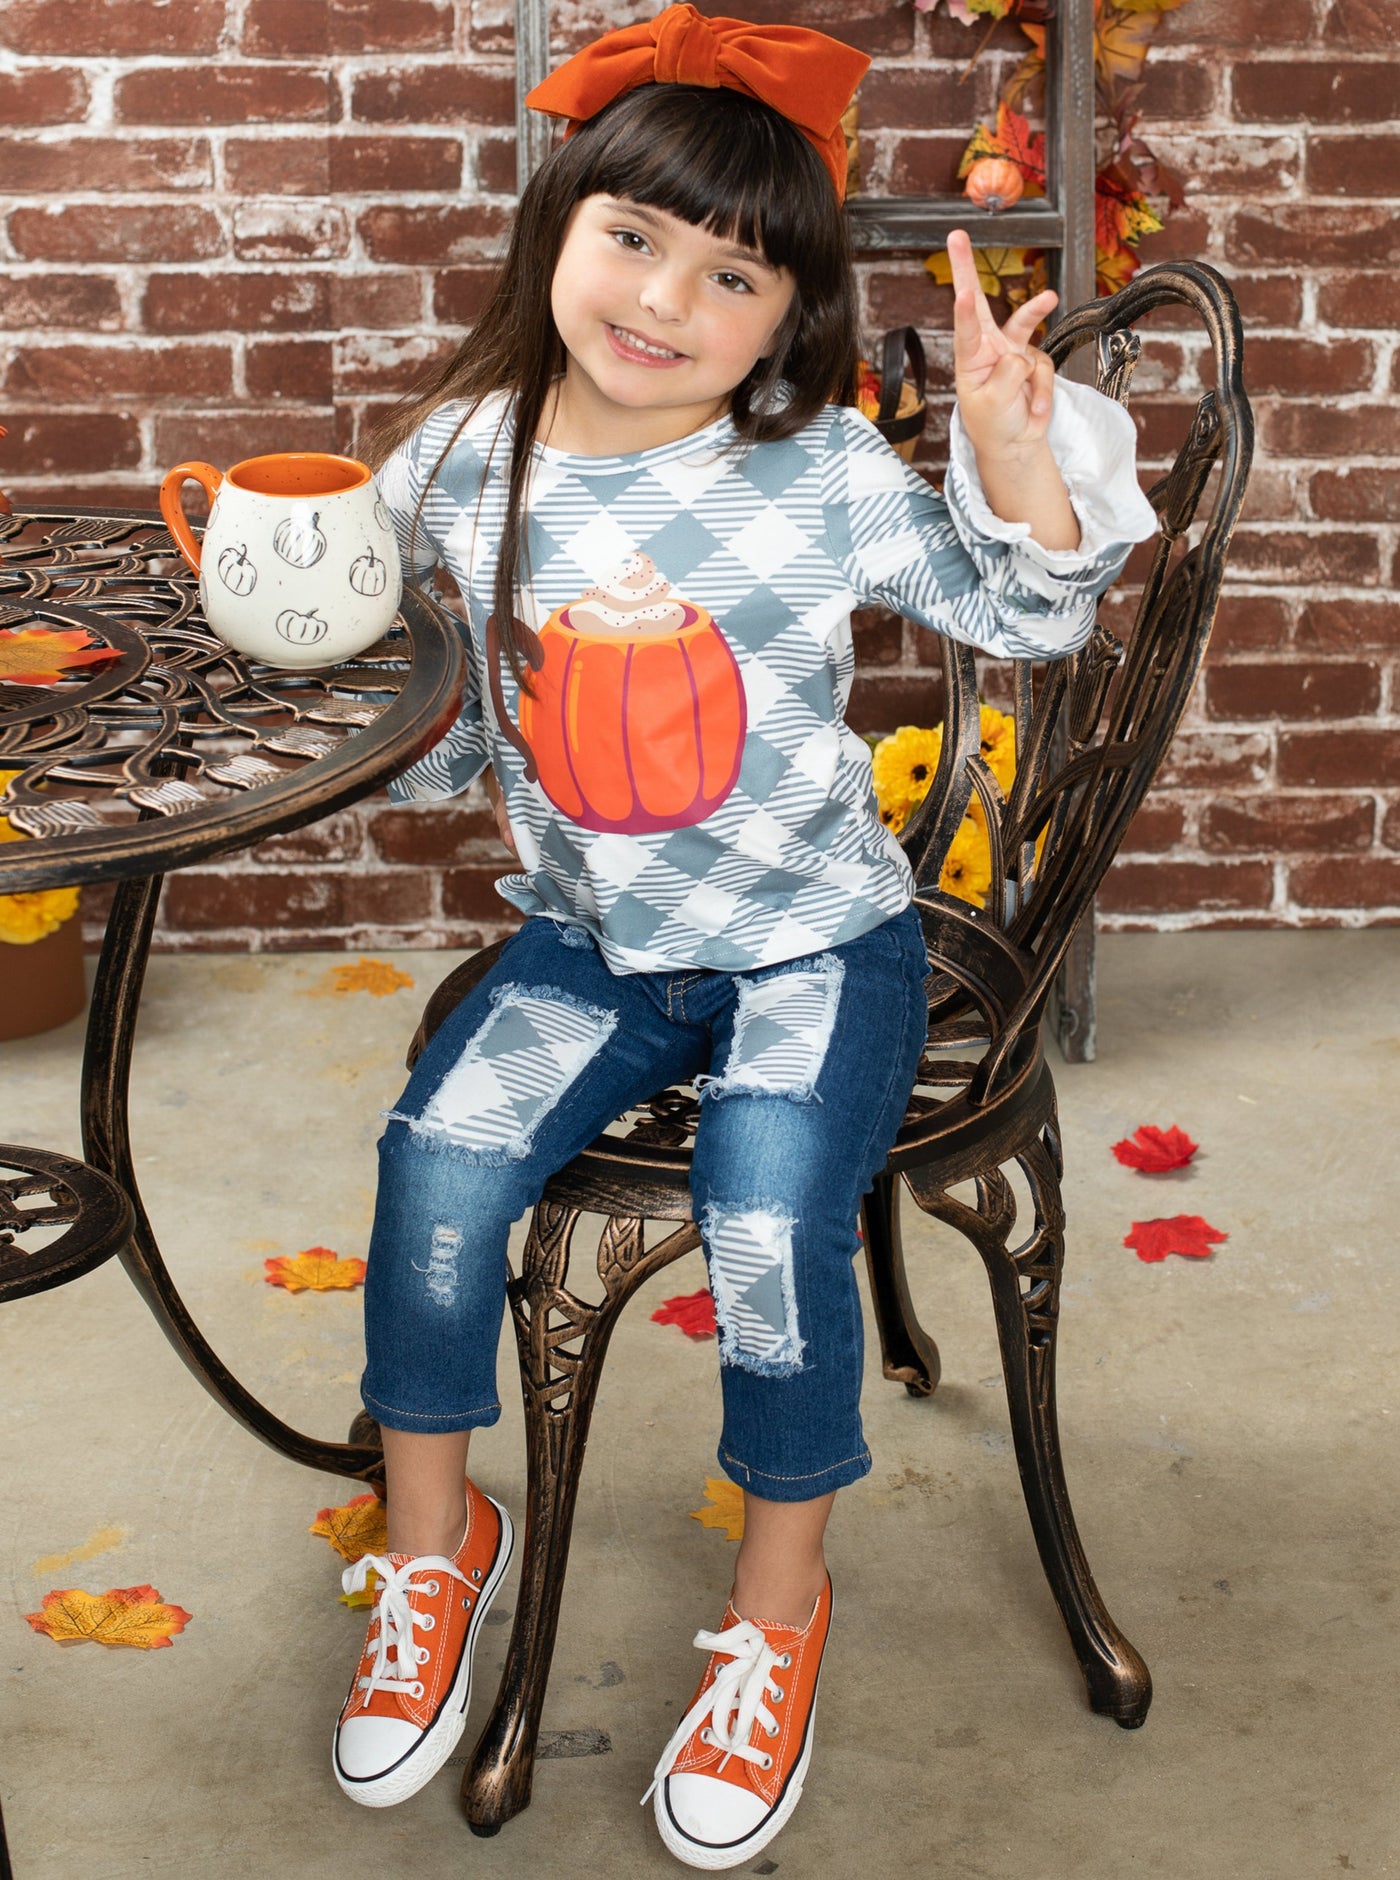 Girls Fall Outfits | Pumpkin Top & Patched Jeans Set - Mia Belle Girls